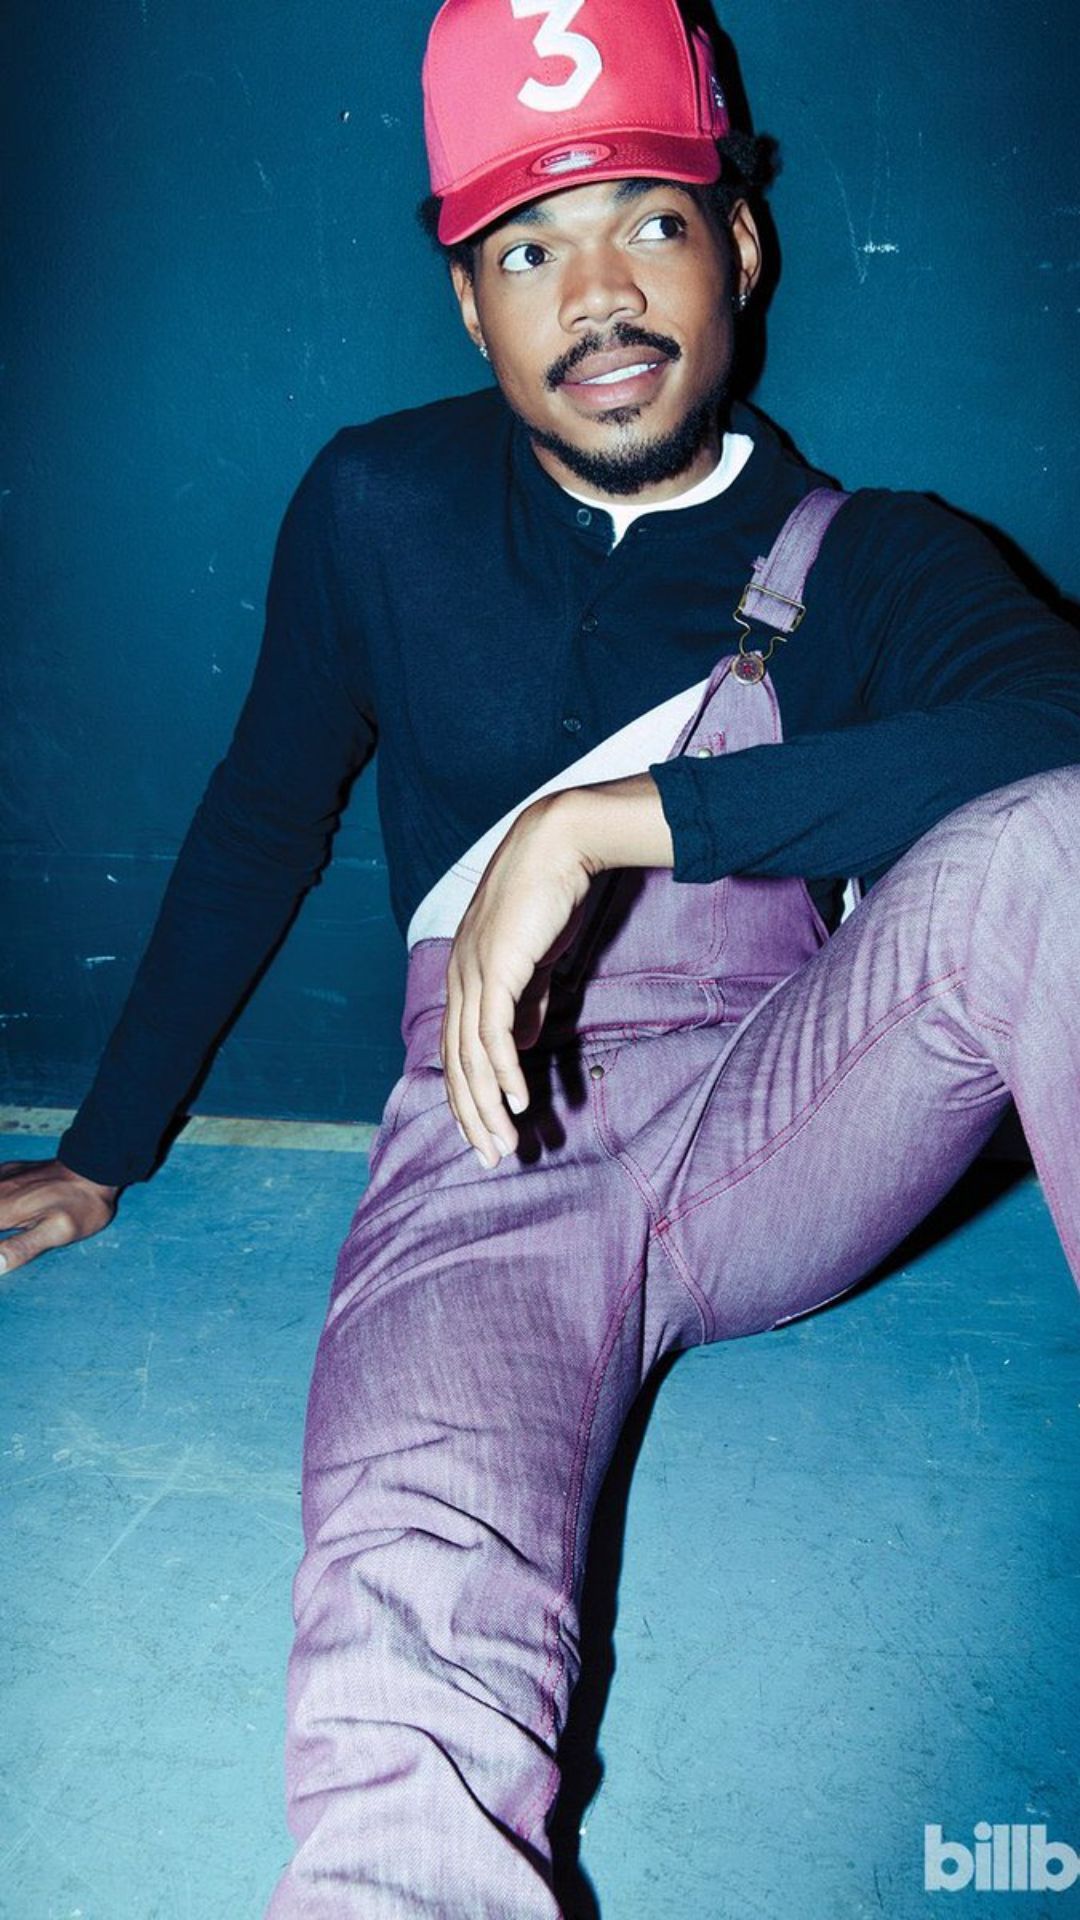 Rapper Chance the Rapper sitting on the ground wearing a red hat and purple pants. - Chance the Rapper